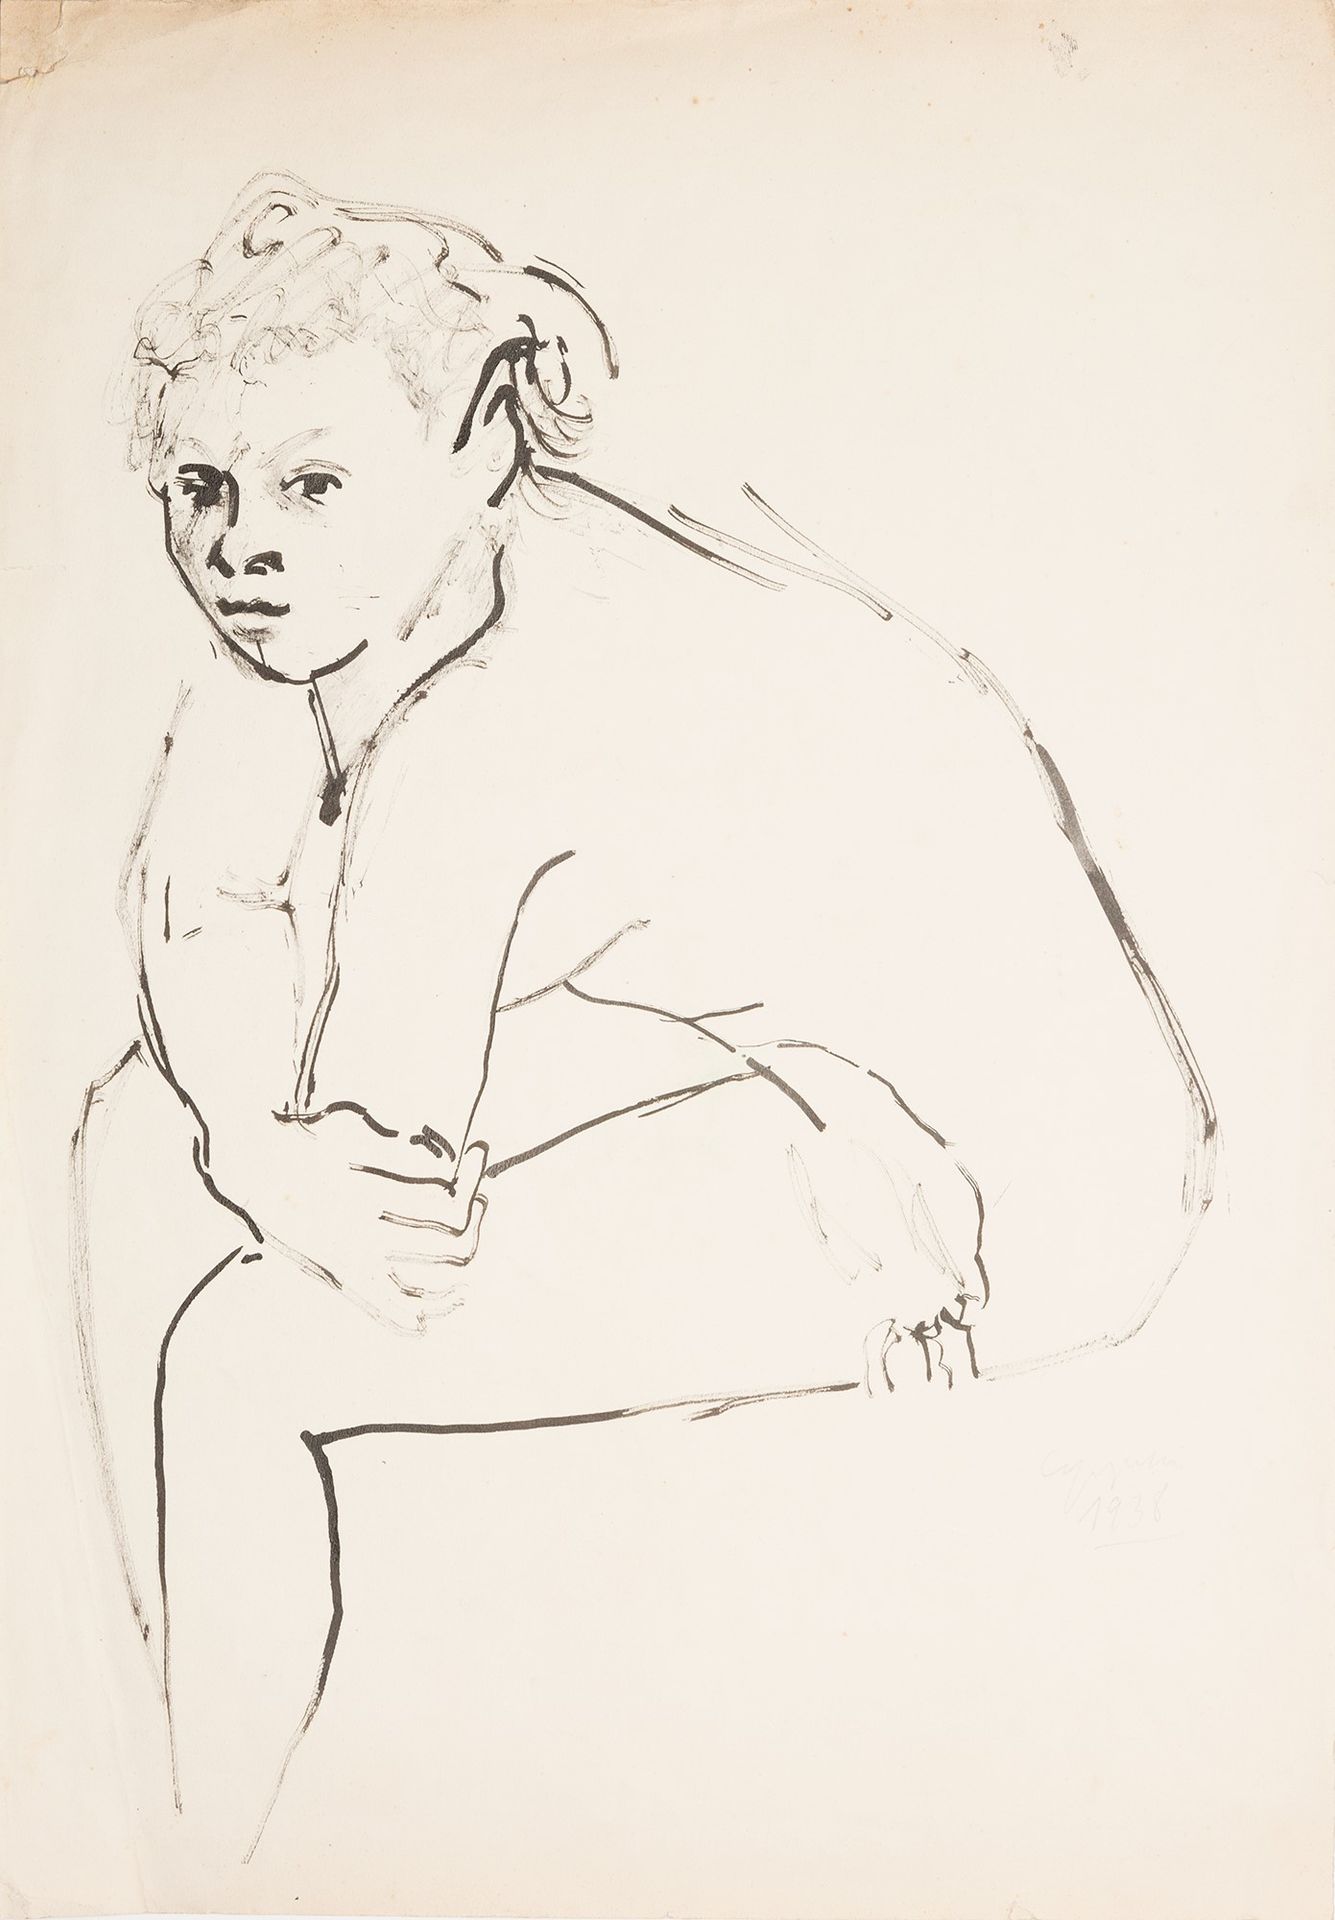 GIUSEPPE CAPOGROSSI Seated woman, 1940/'41

diluted china ink on paper
50 x 35 c&hellip;